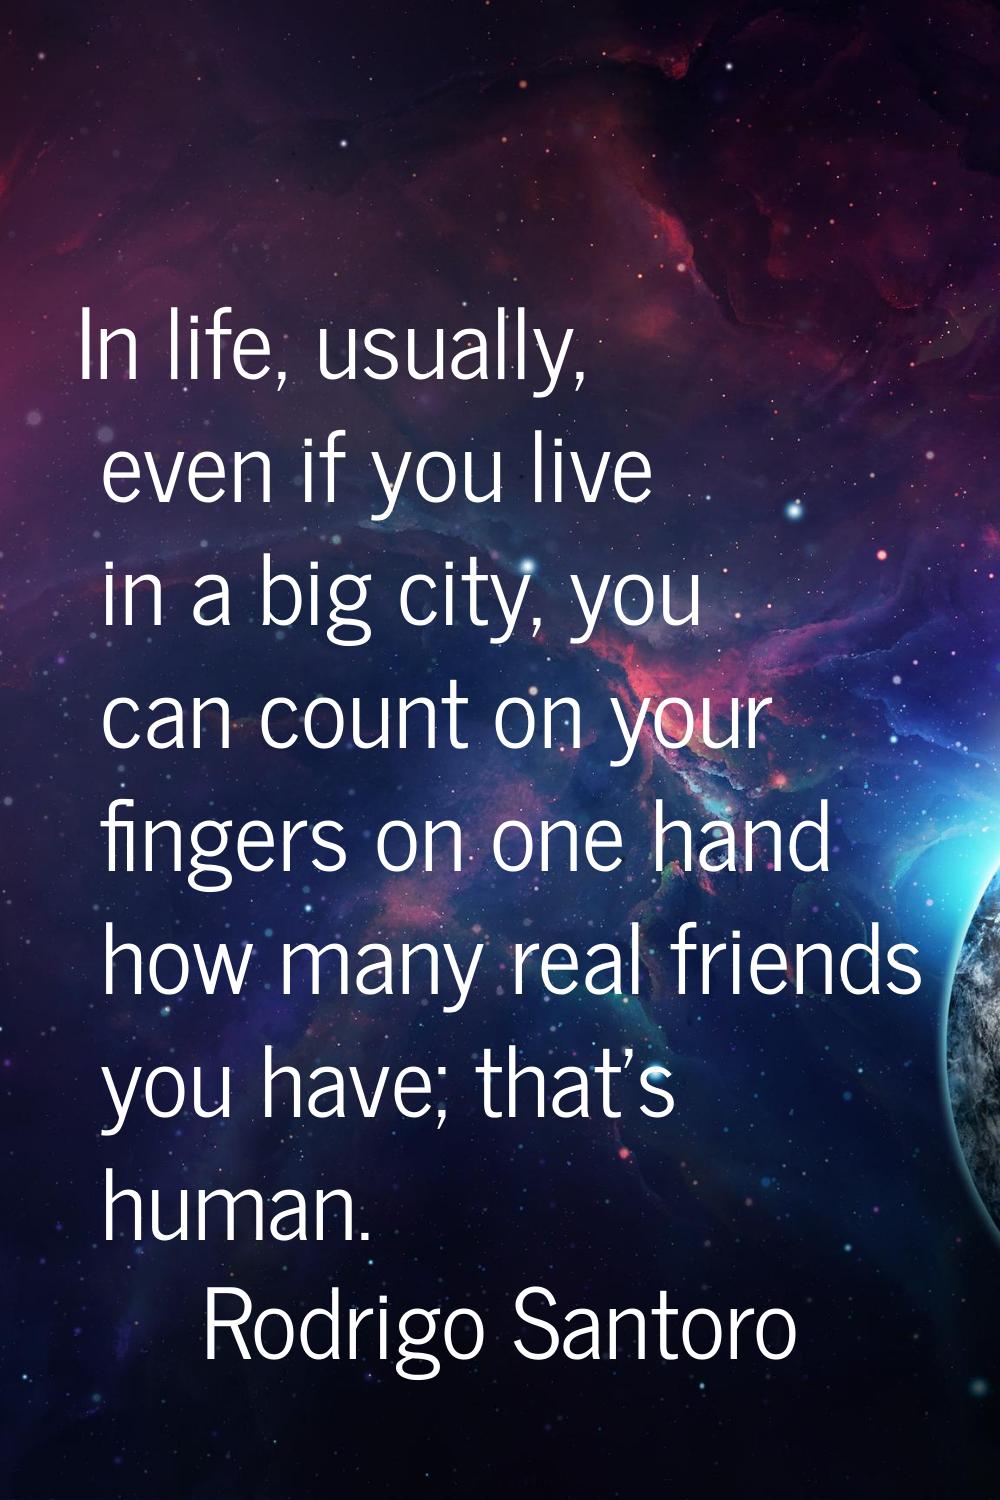 In life, usually, even if you live in a big city, you can count on your fingers on one hand how man